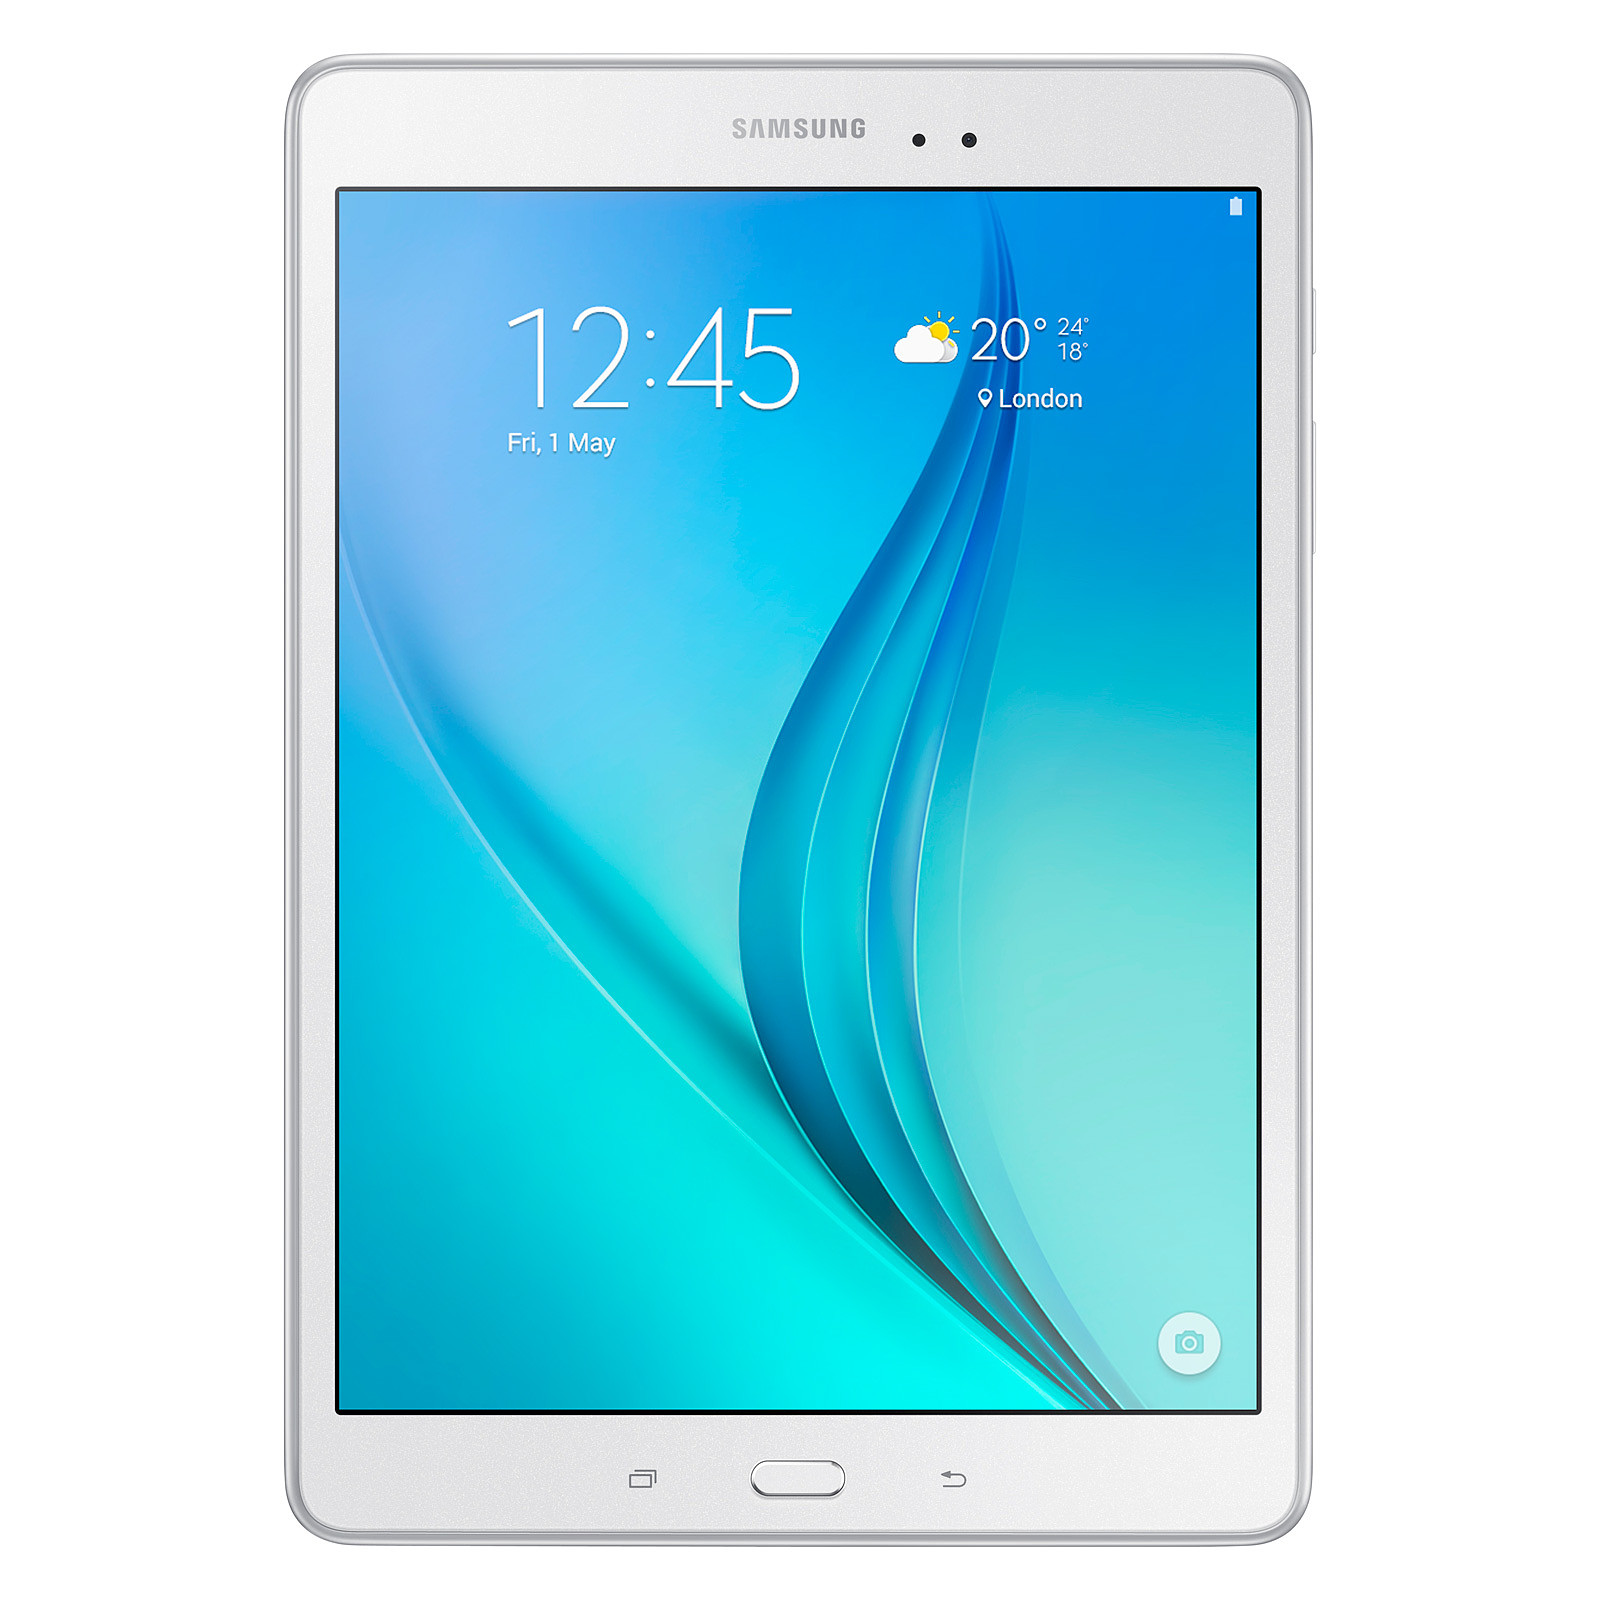 Samsung Galaxy Tab A LTE 9.7" SM-T555 16 Go Blanche · Reconditionne - Tablette tactile Samsung